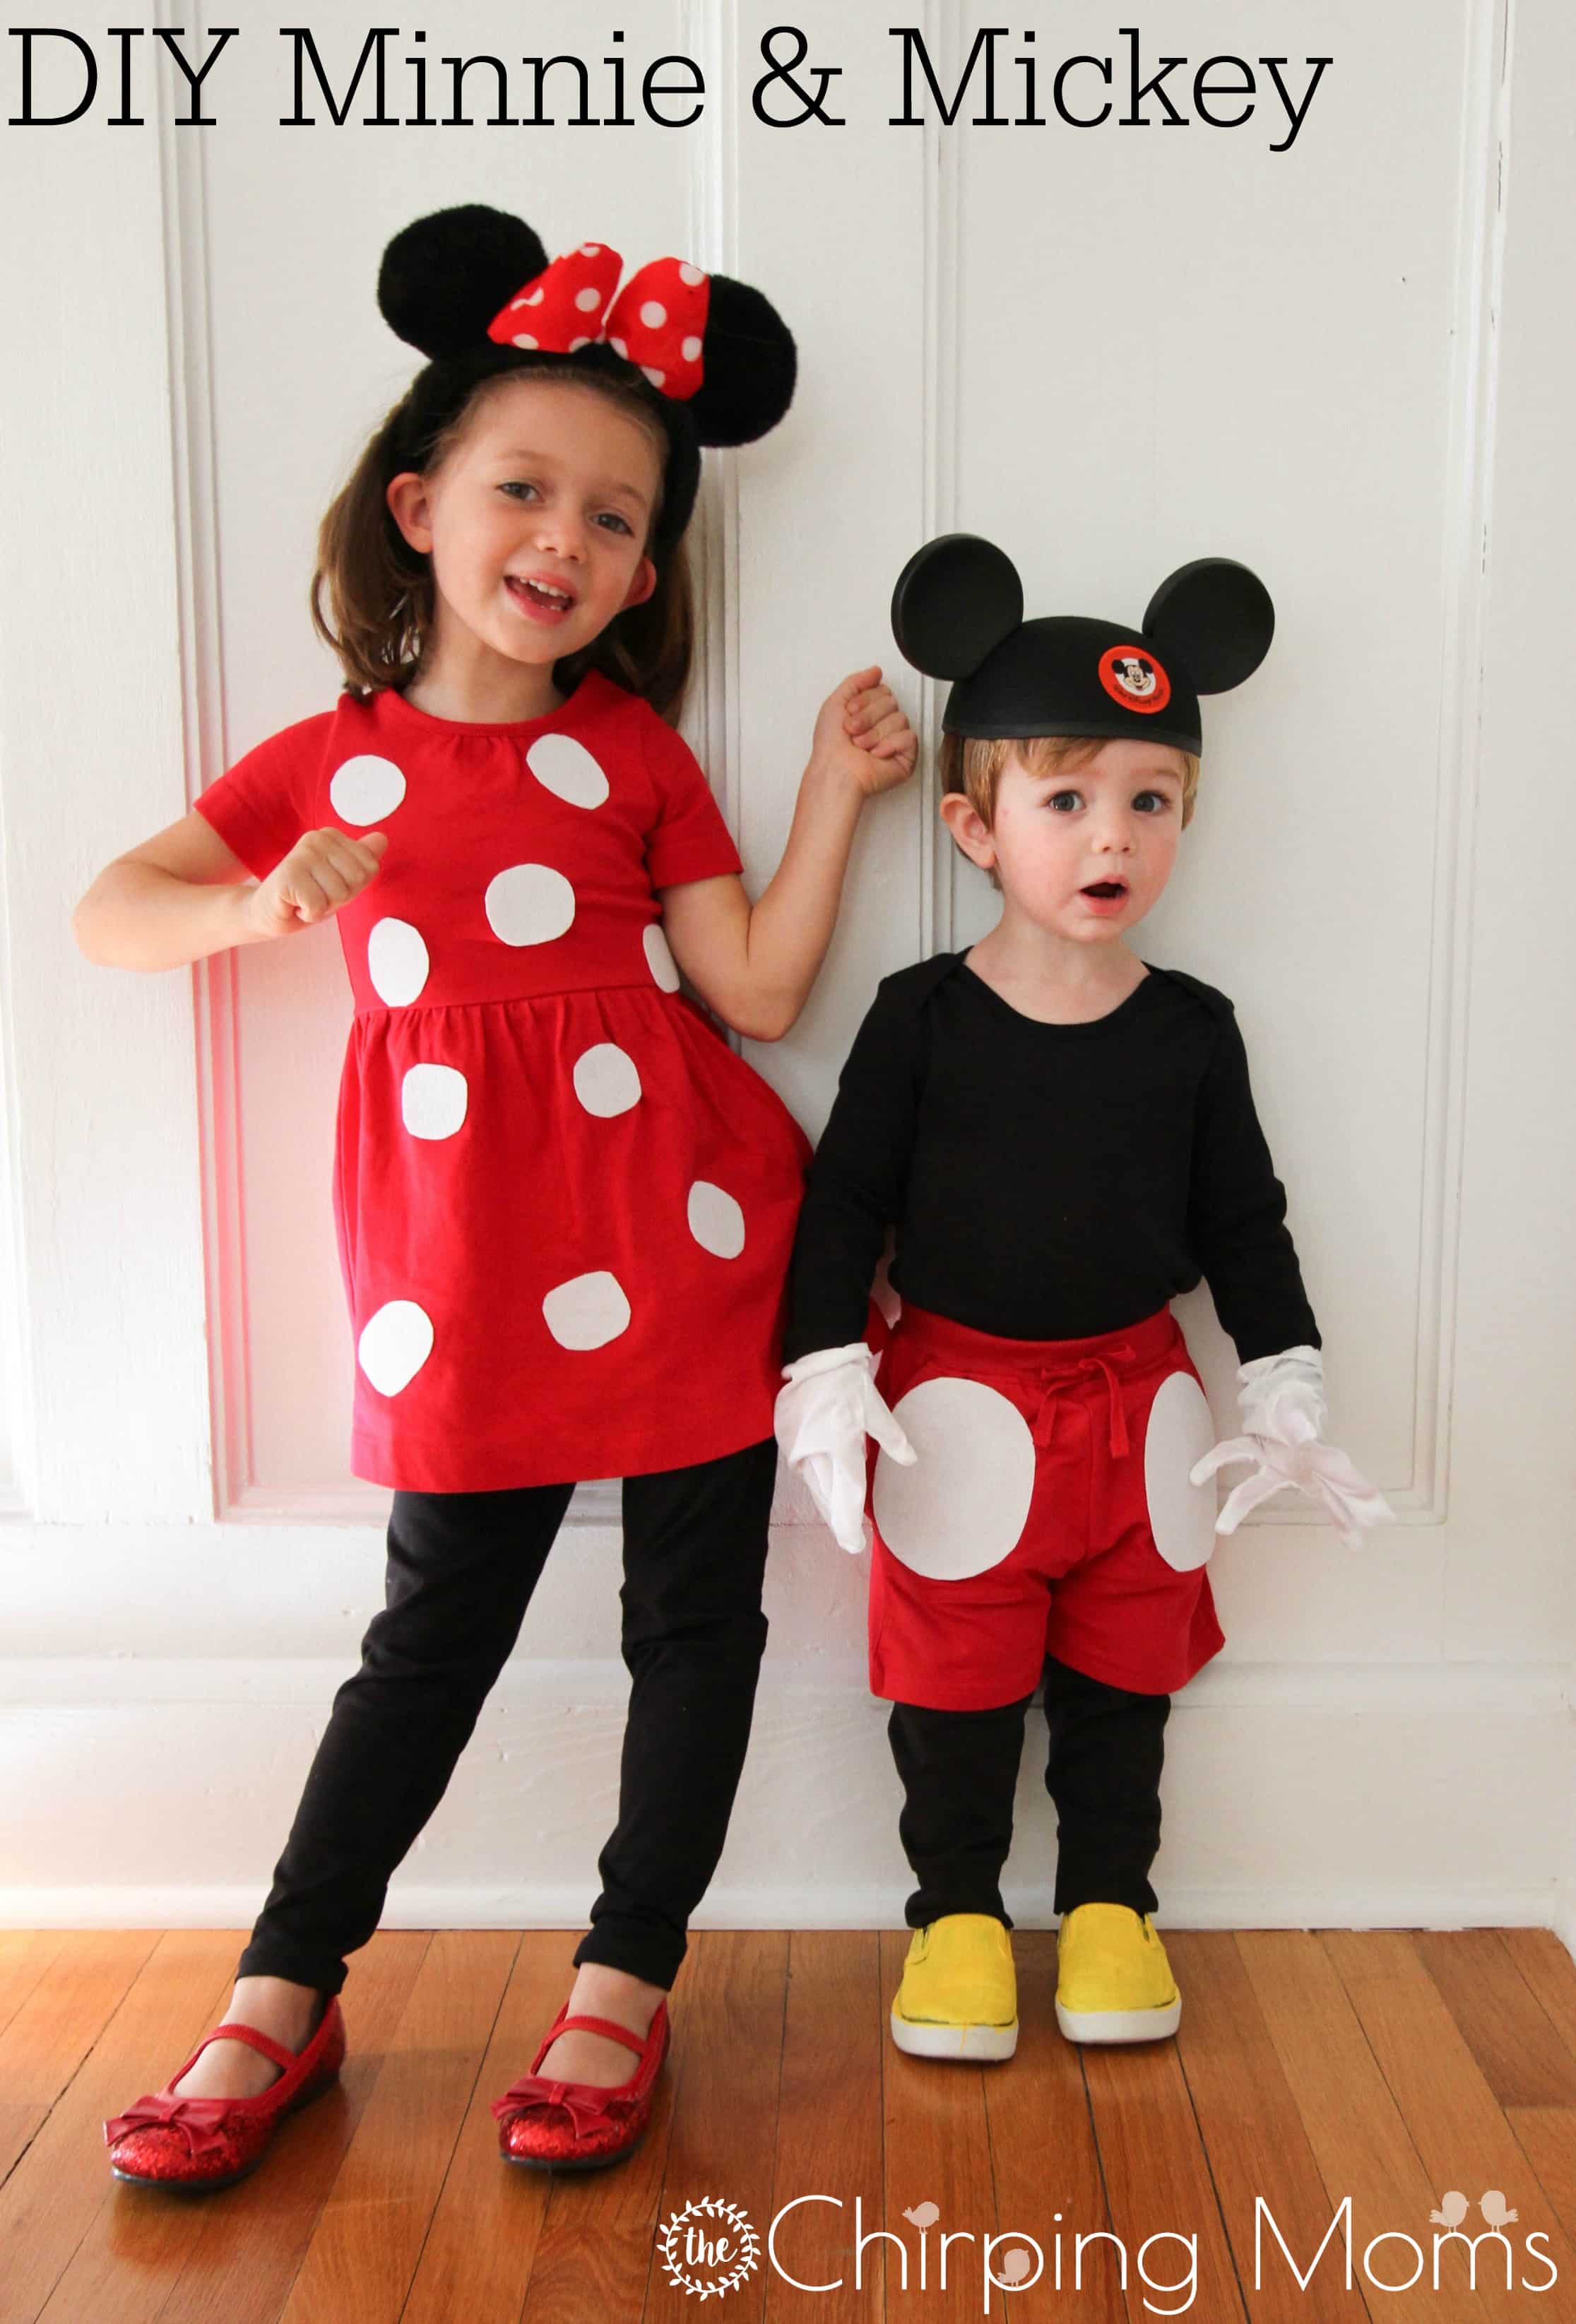 diy-minnie-mouse-mickey-mouse-costume-2.